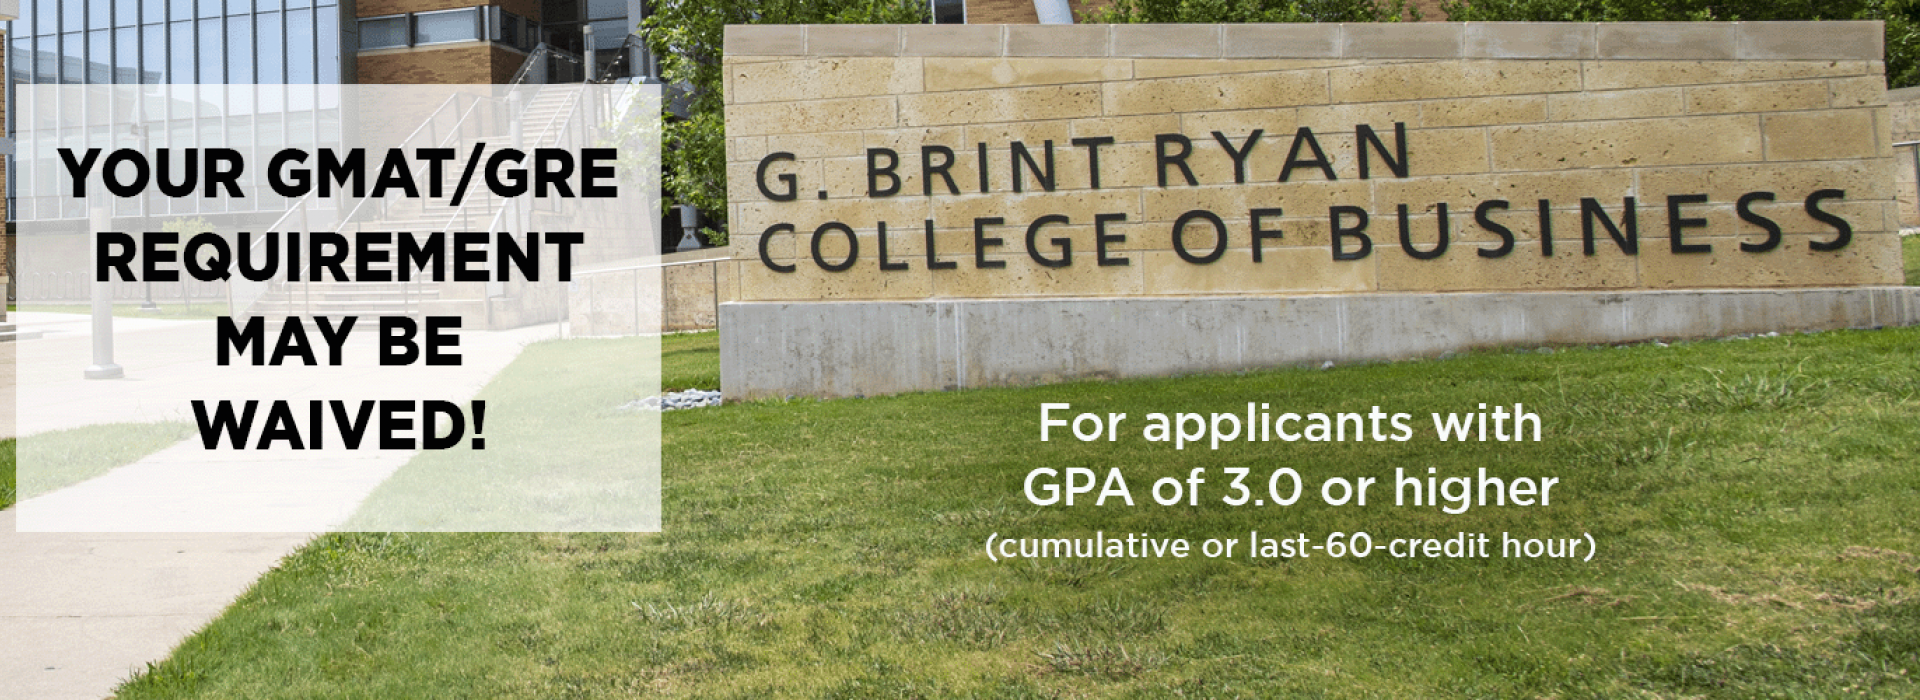 Your GMAT/GRE Requirement May be waived for applicants with GPA 3.0 or higher.